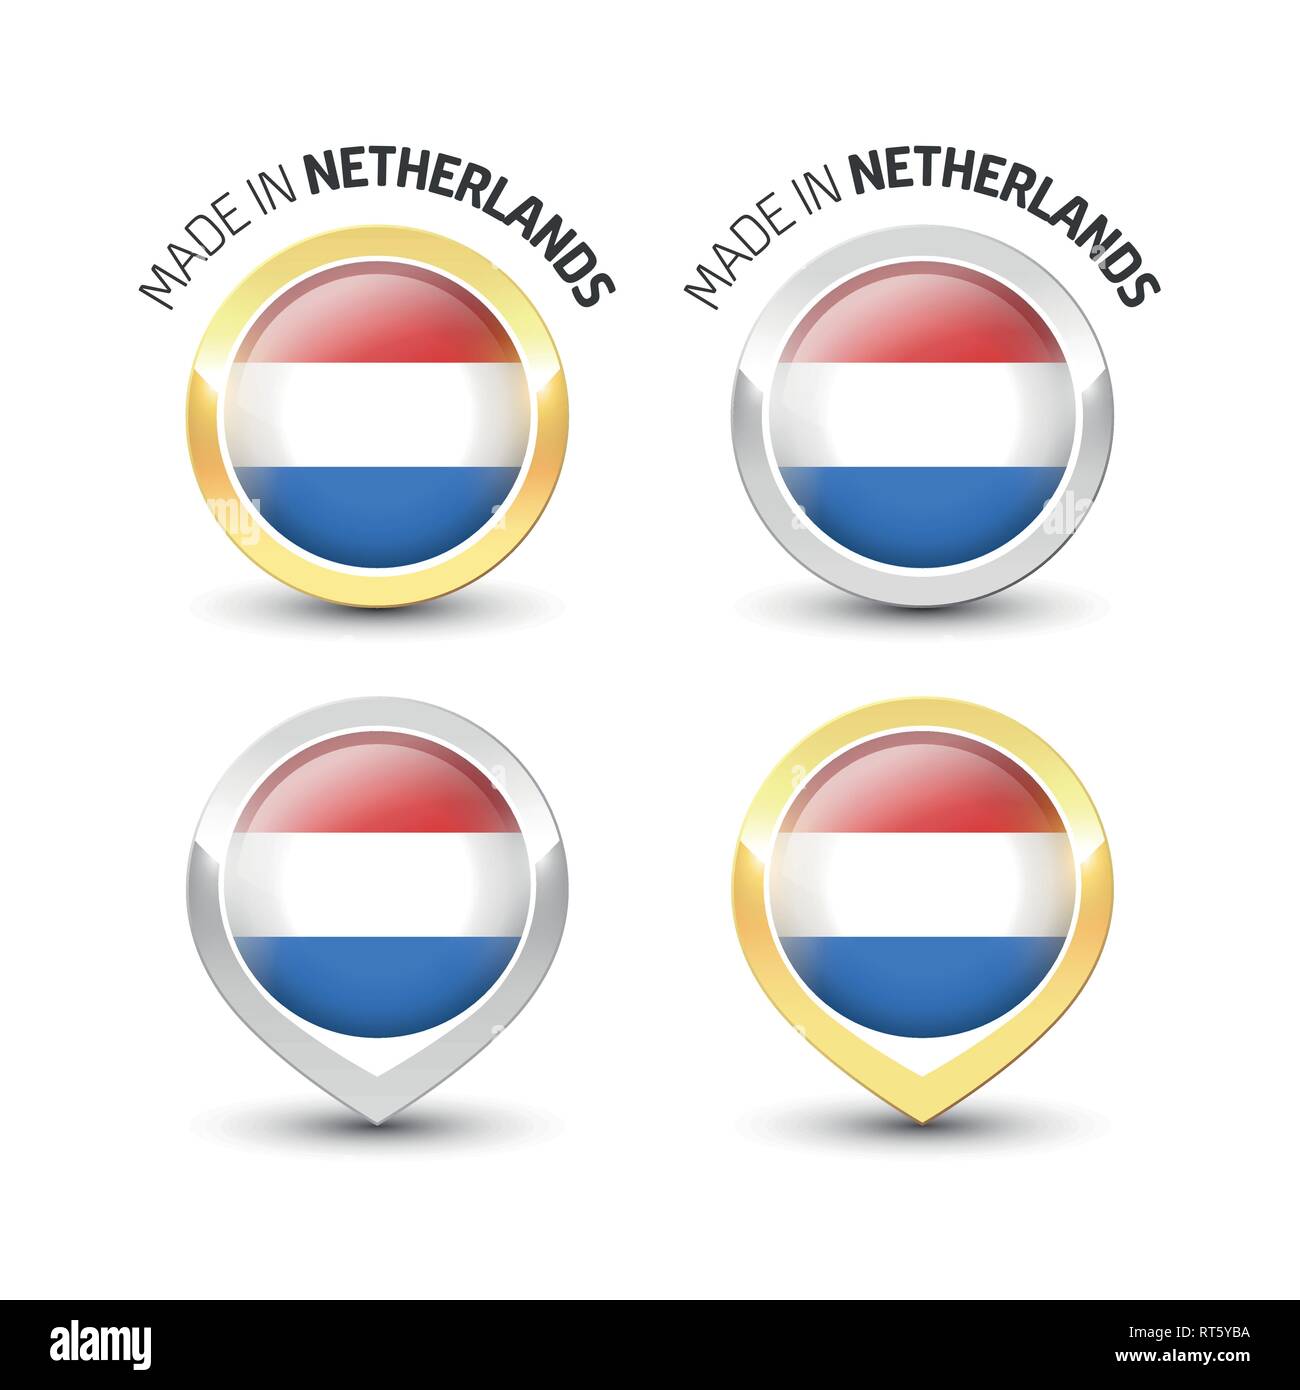 Made in Netherlands - Guarantee label with the Dutch flag inside round gold and silver icons. Stock Vector